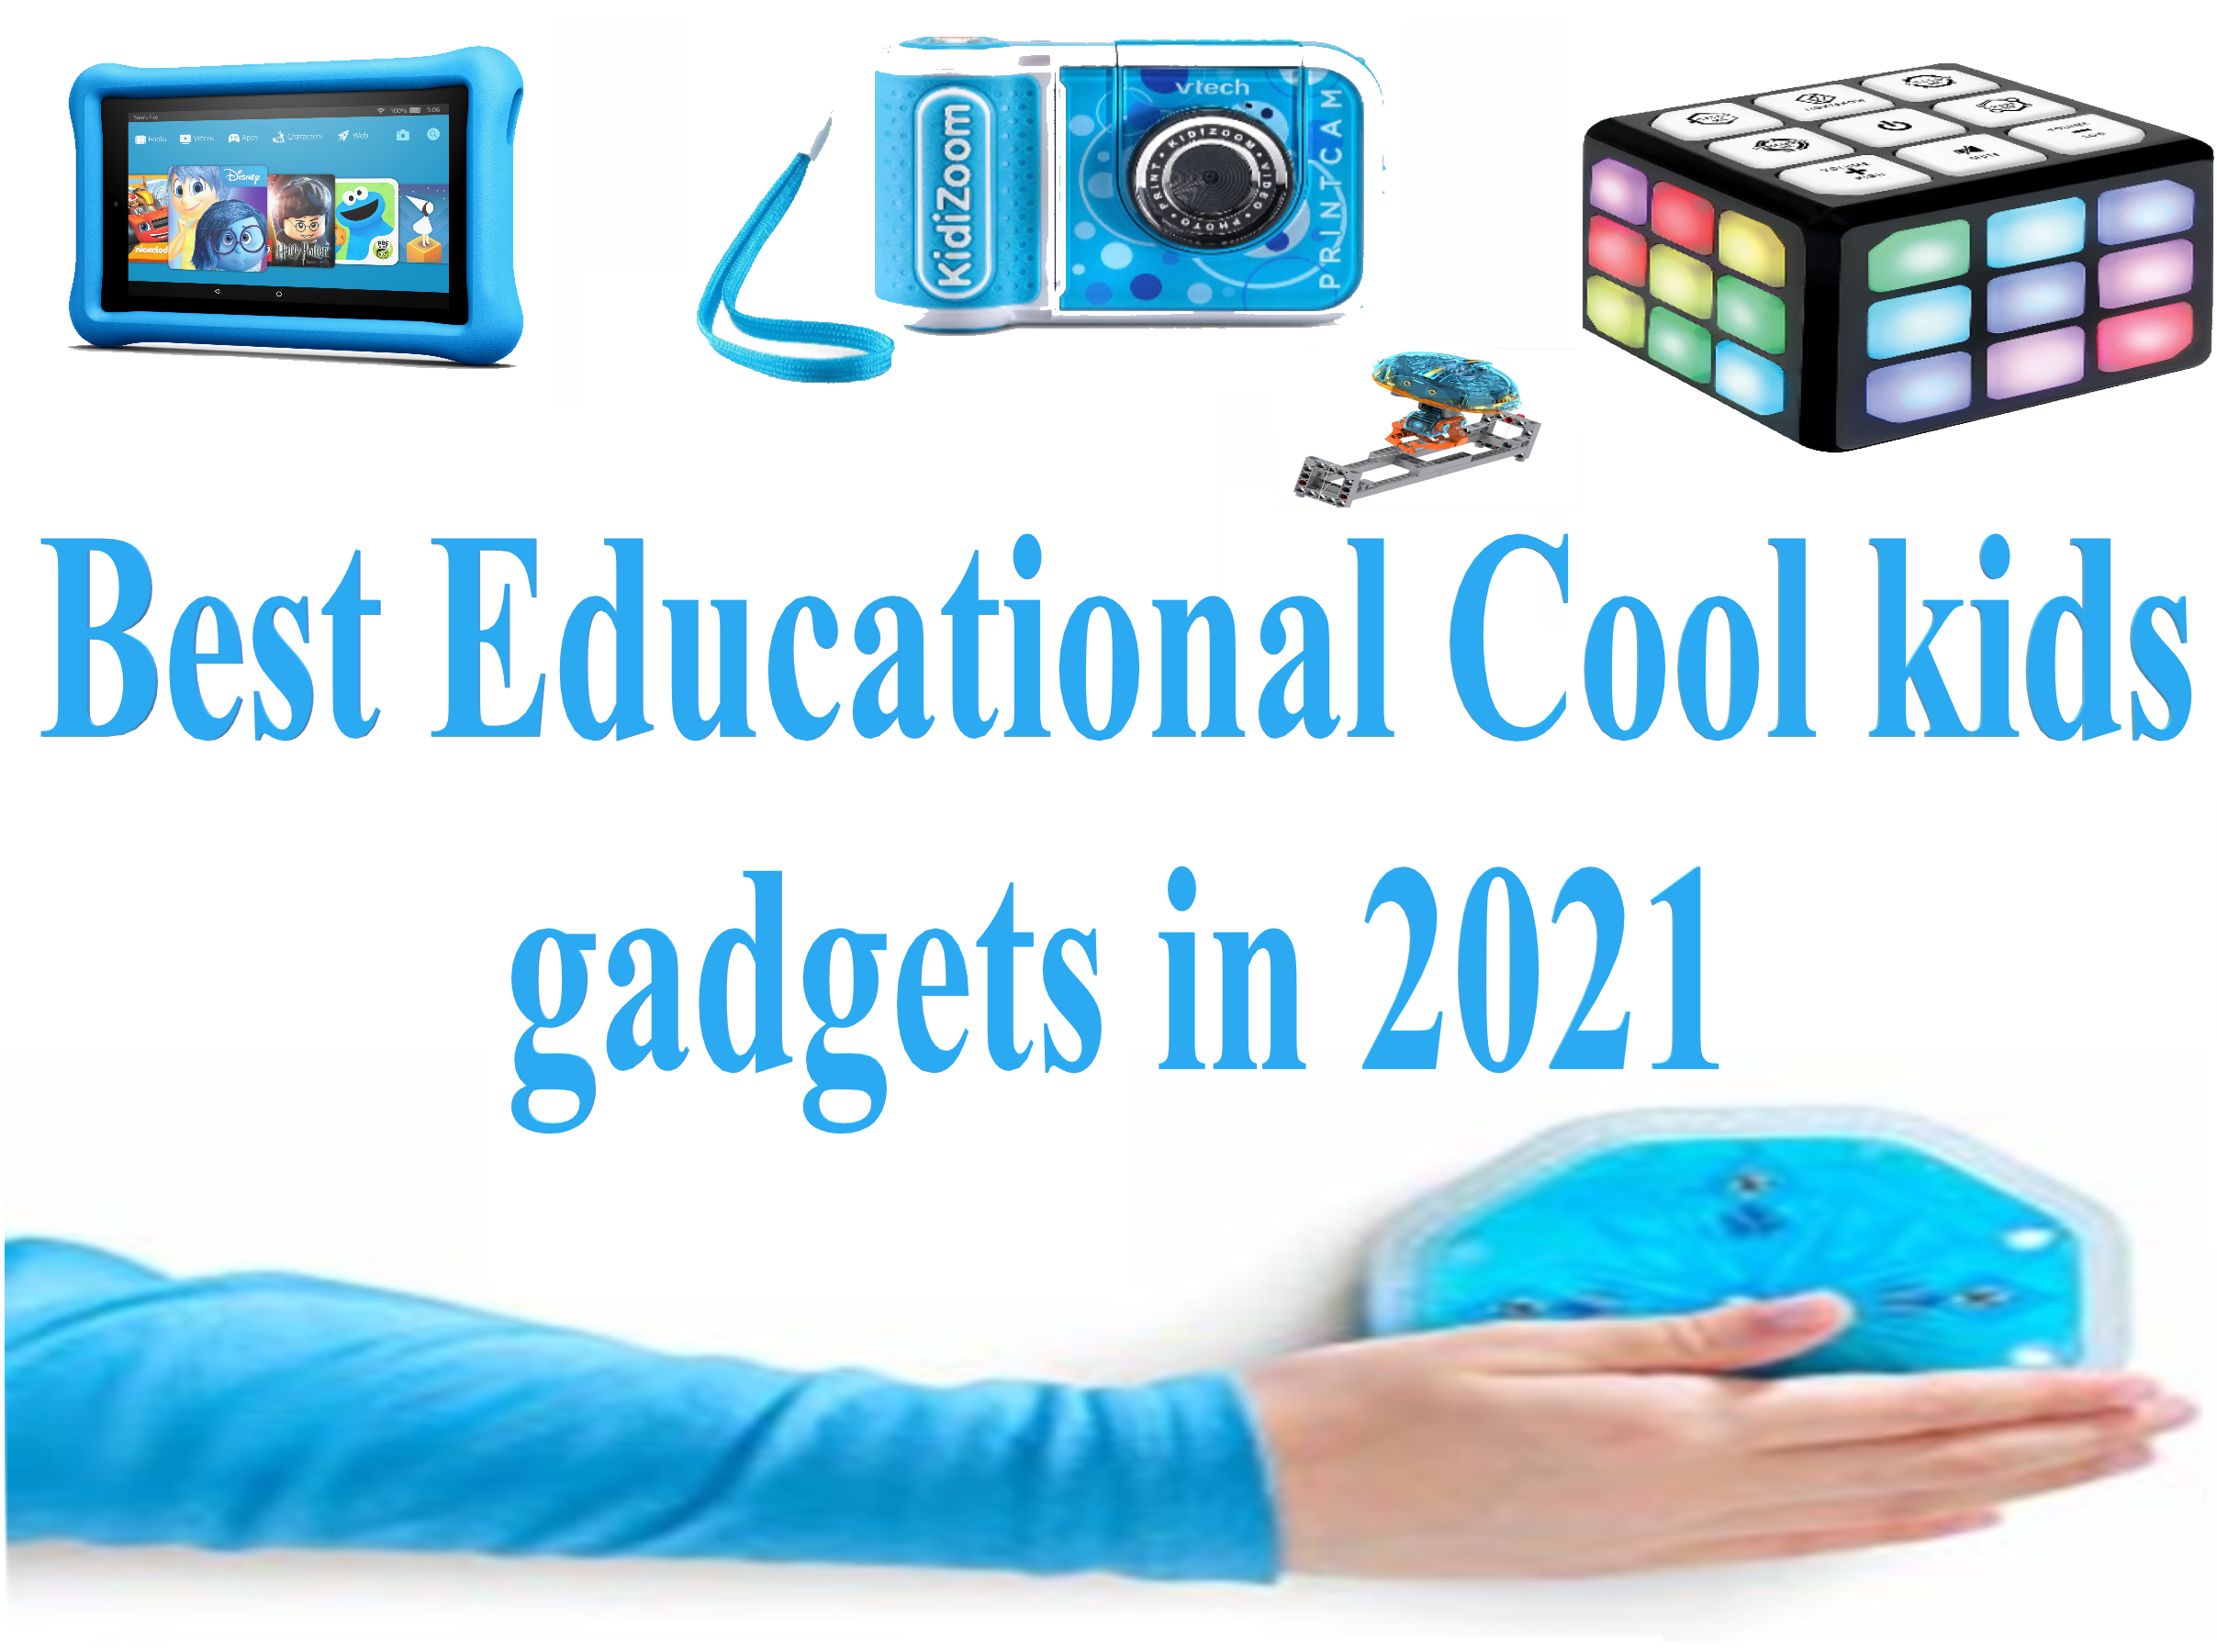 Assists you in making choice regarding Cool Kids Gadgets